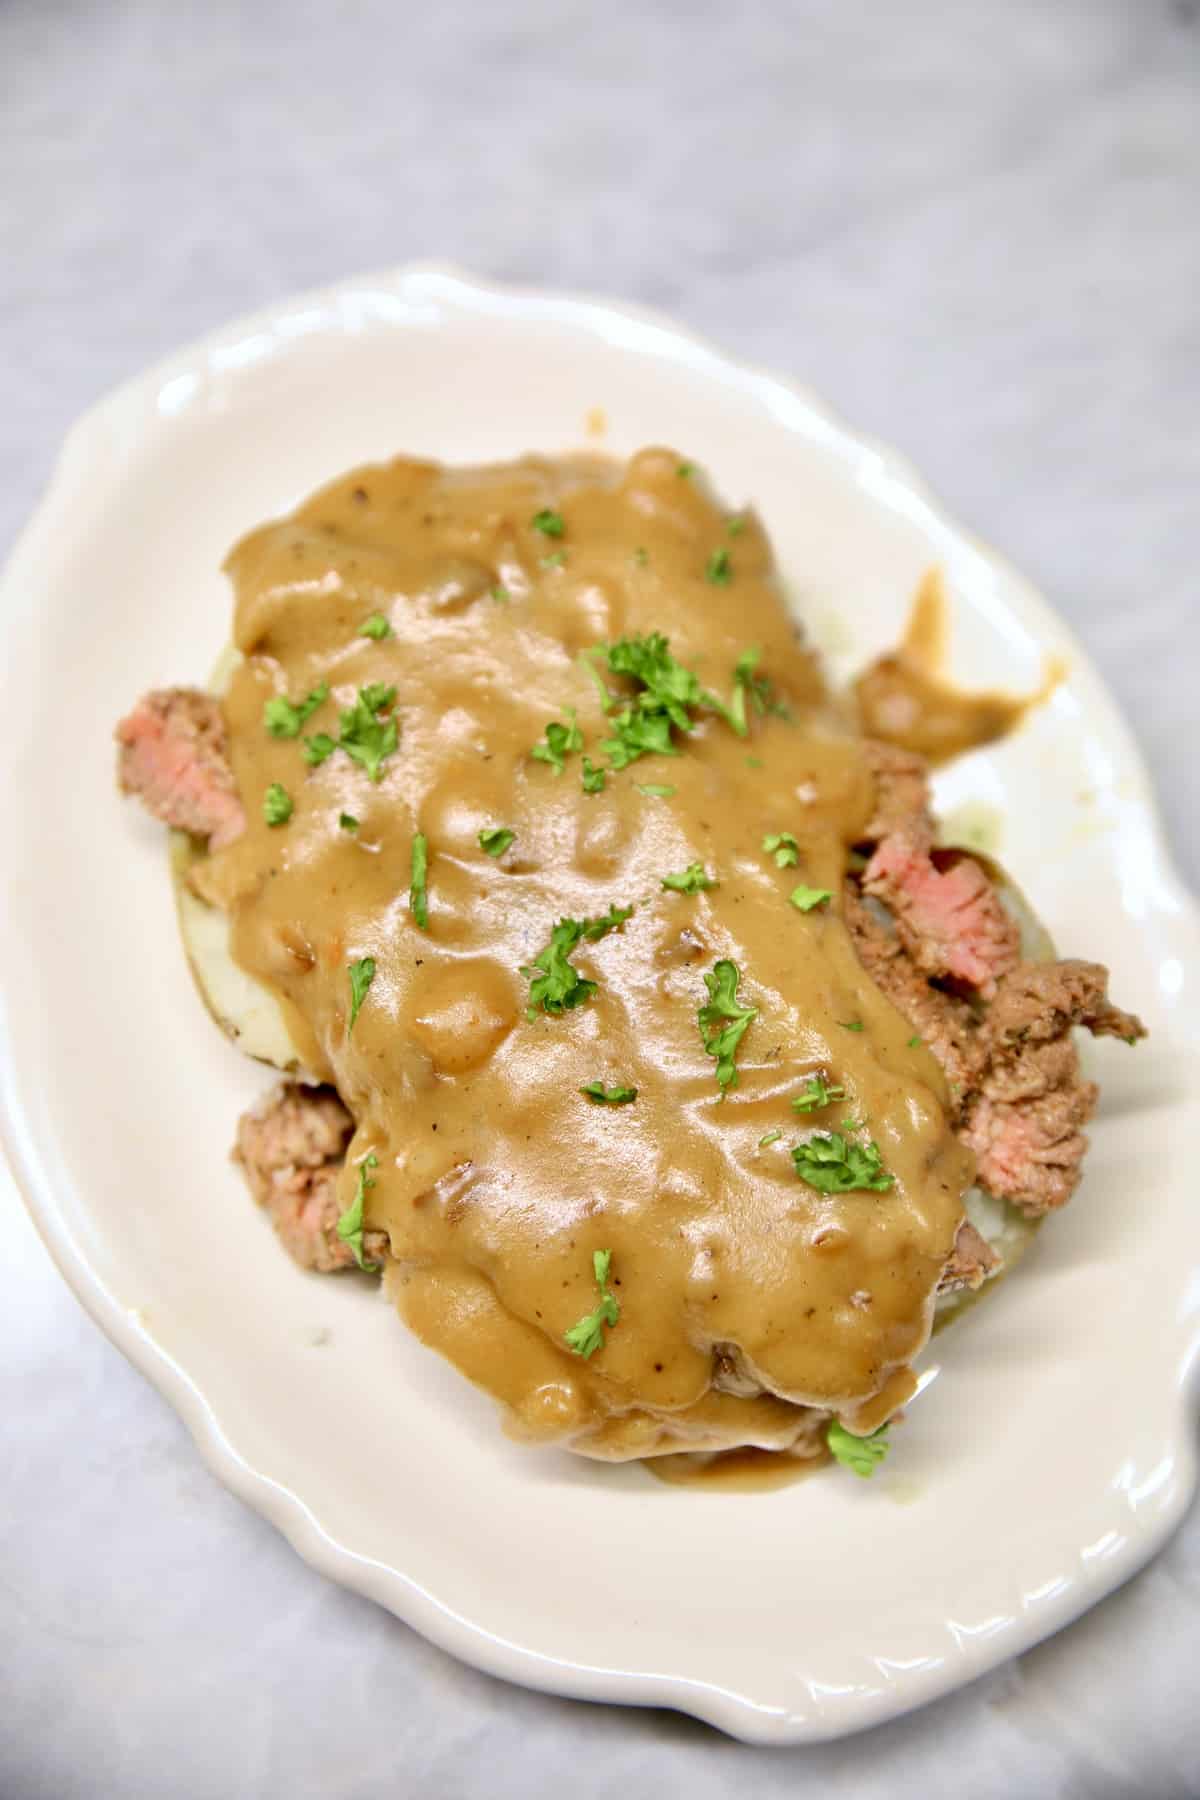 Grilled cube steak and gravy over baked potato on a plate.